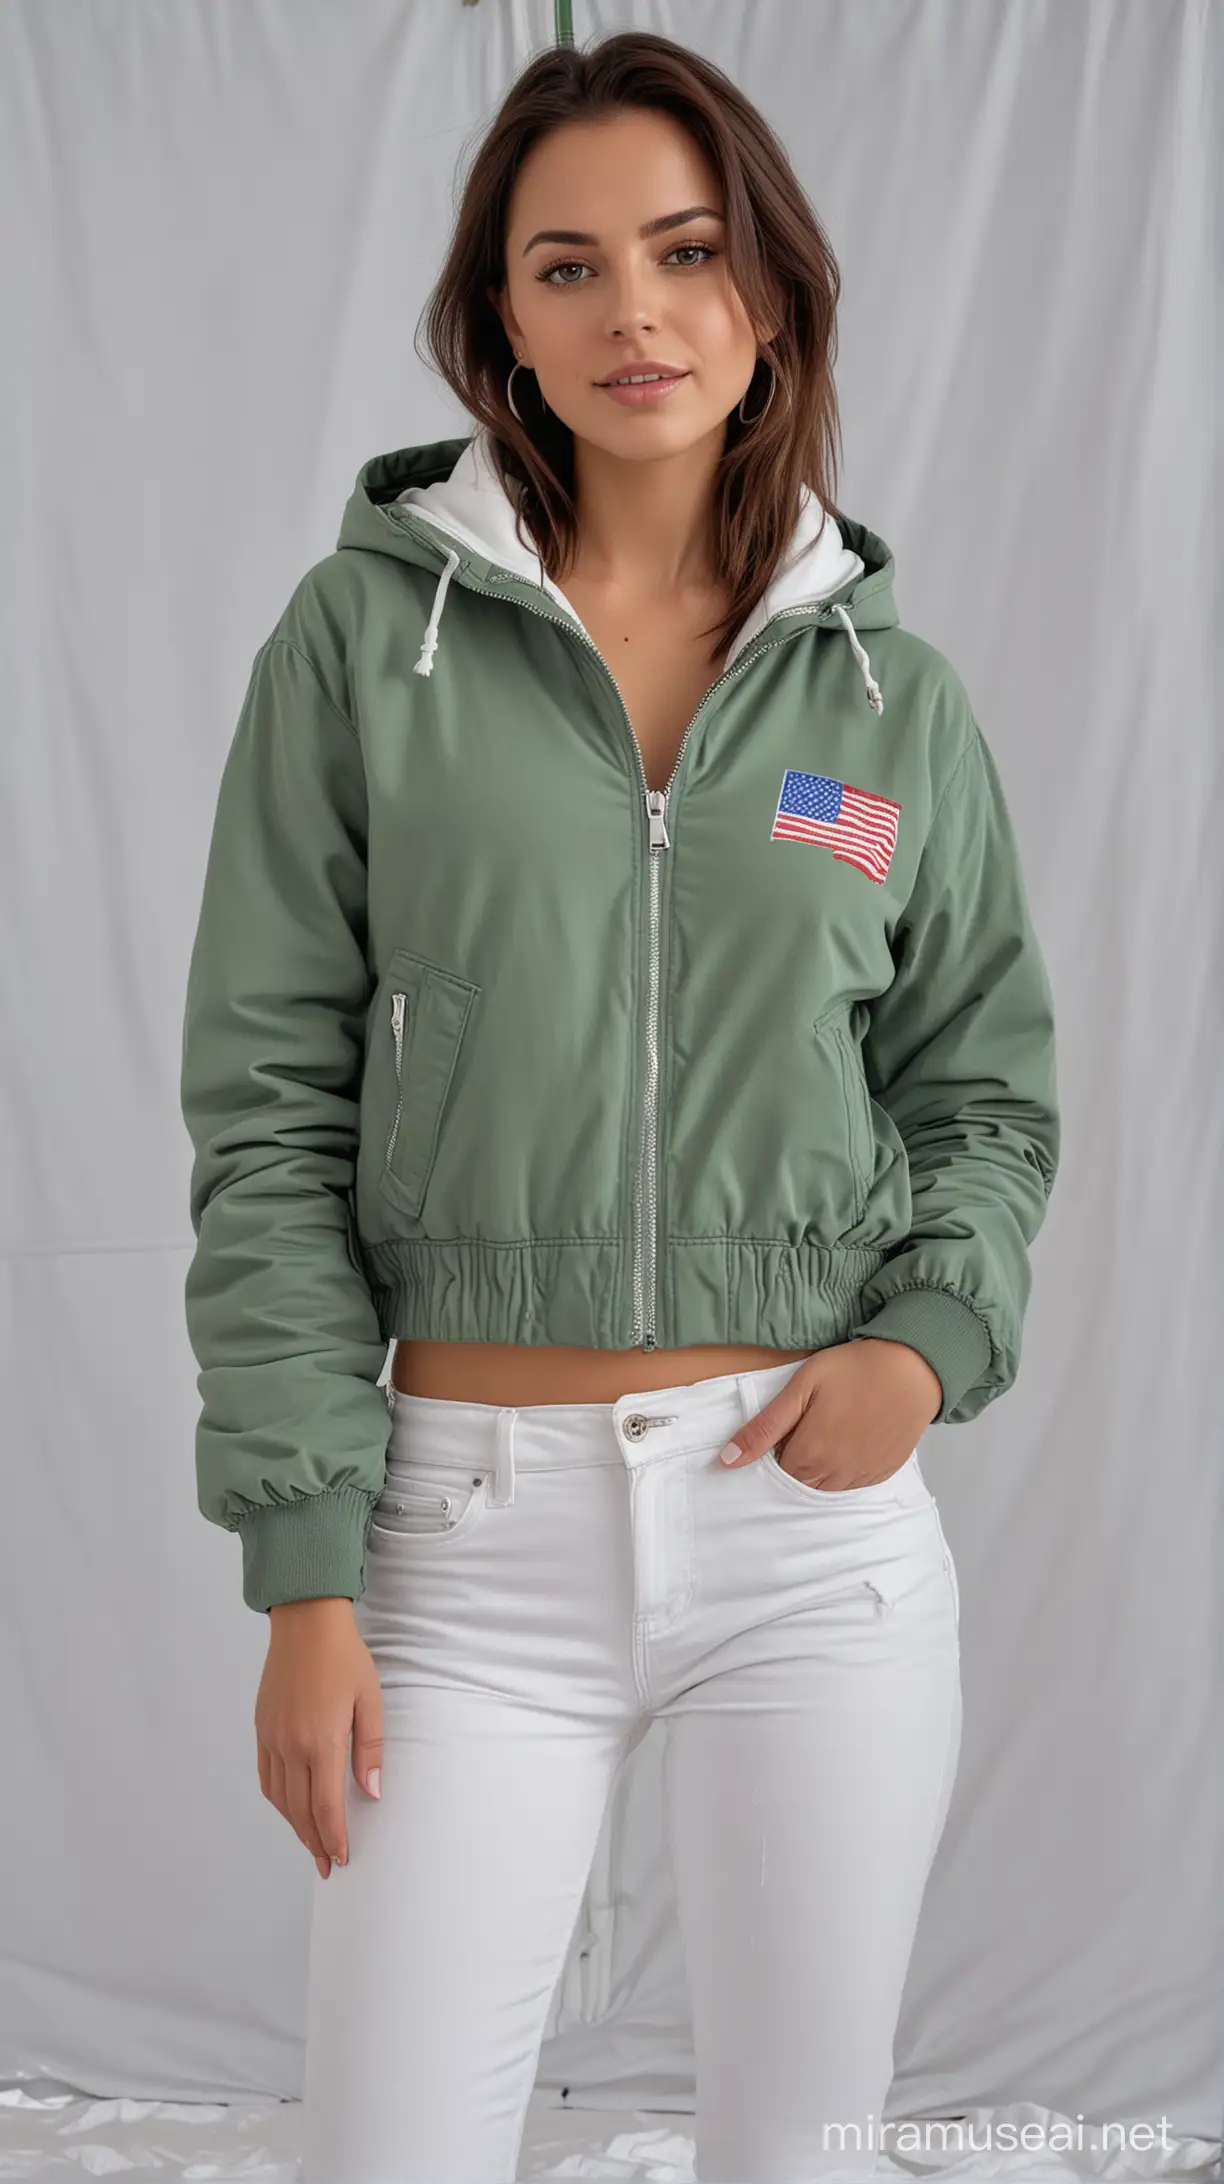 4k Ai art front view beautiful USA girl ear tops white jeans and green zipper jacket in USA snow tent